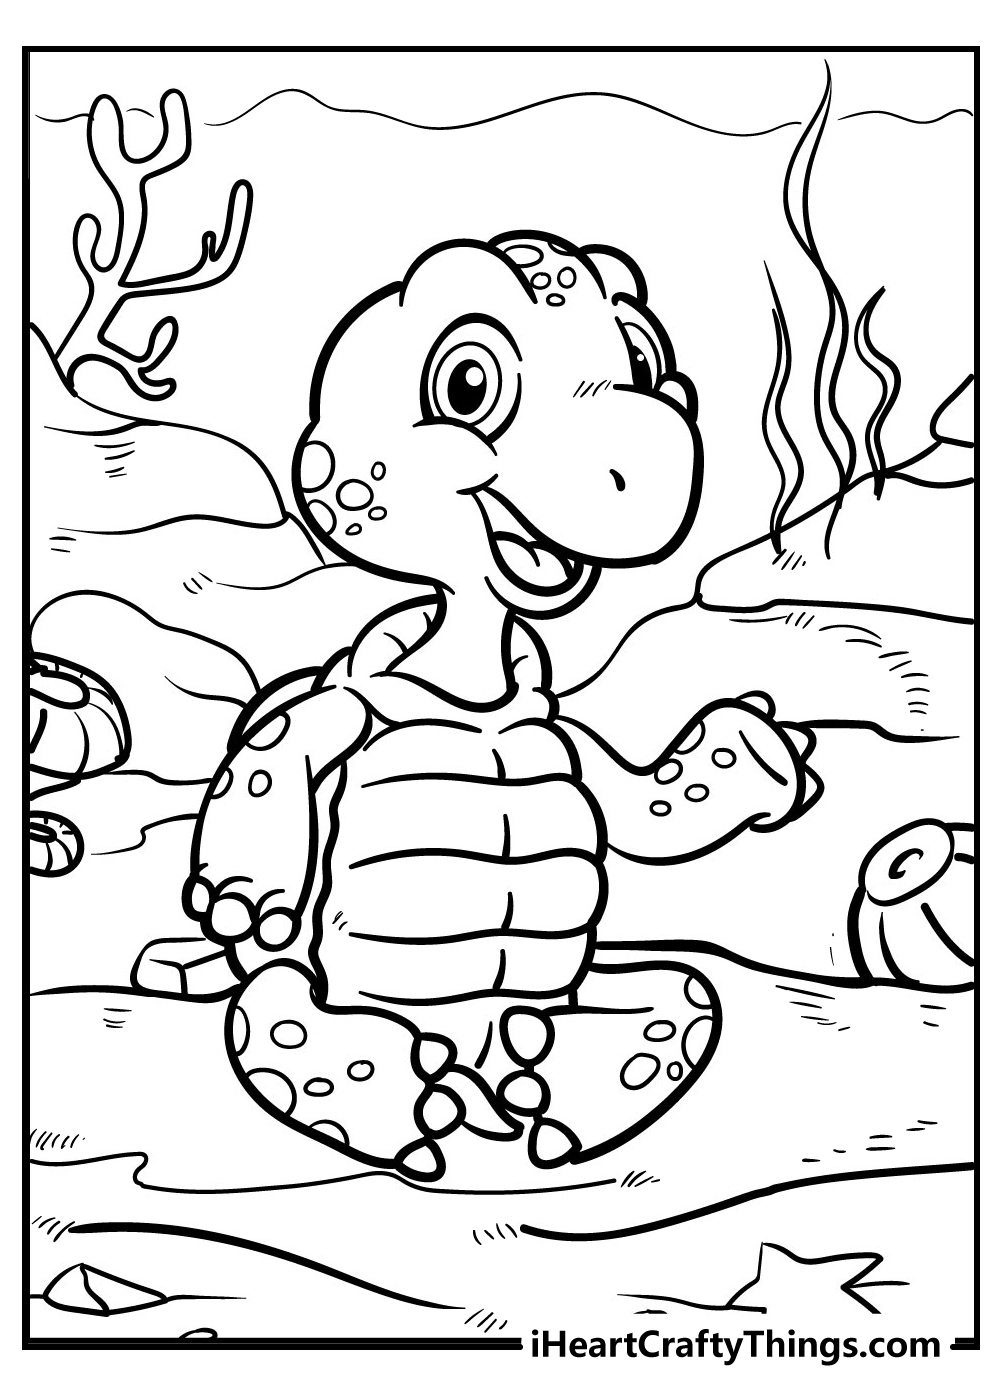 turtle coloring pages free download